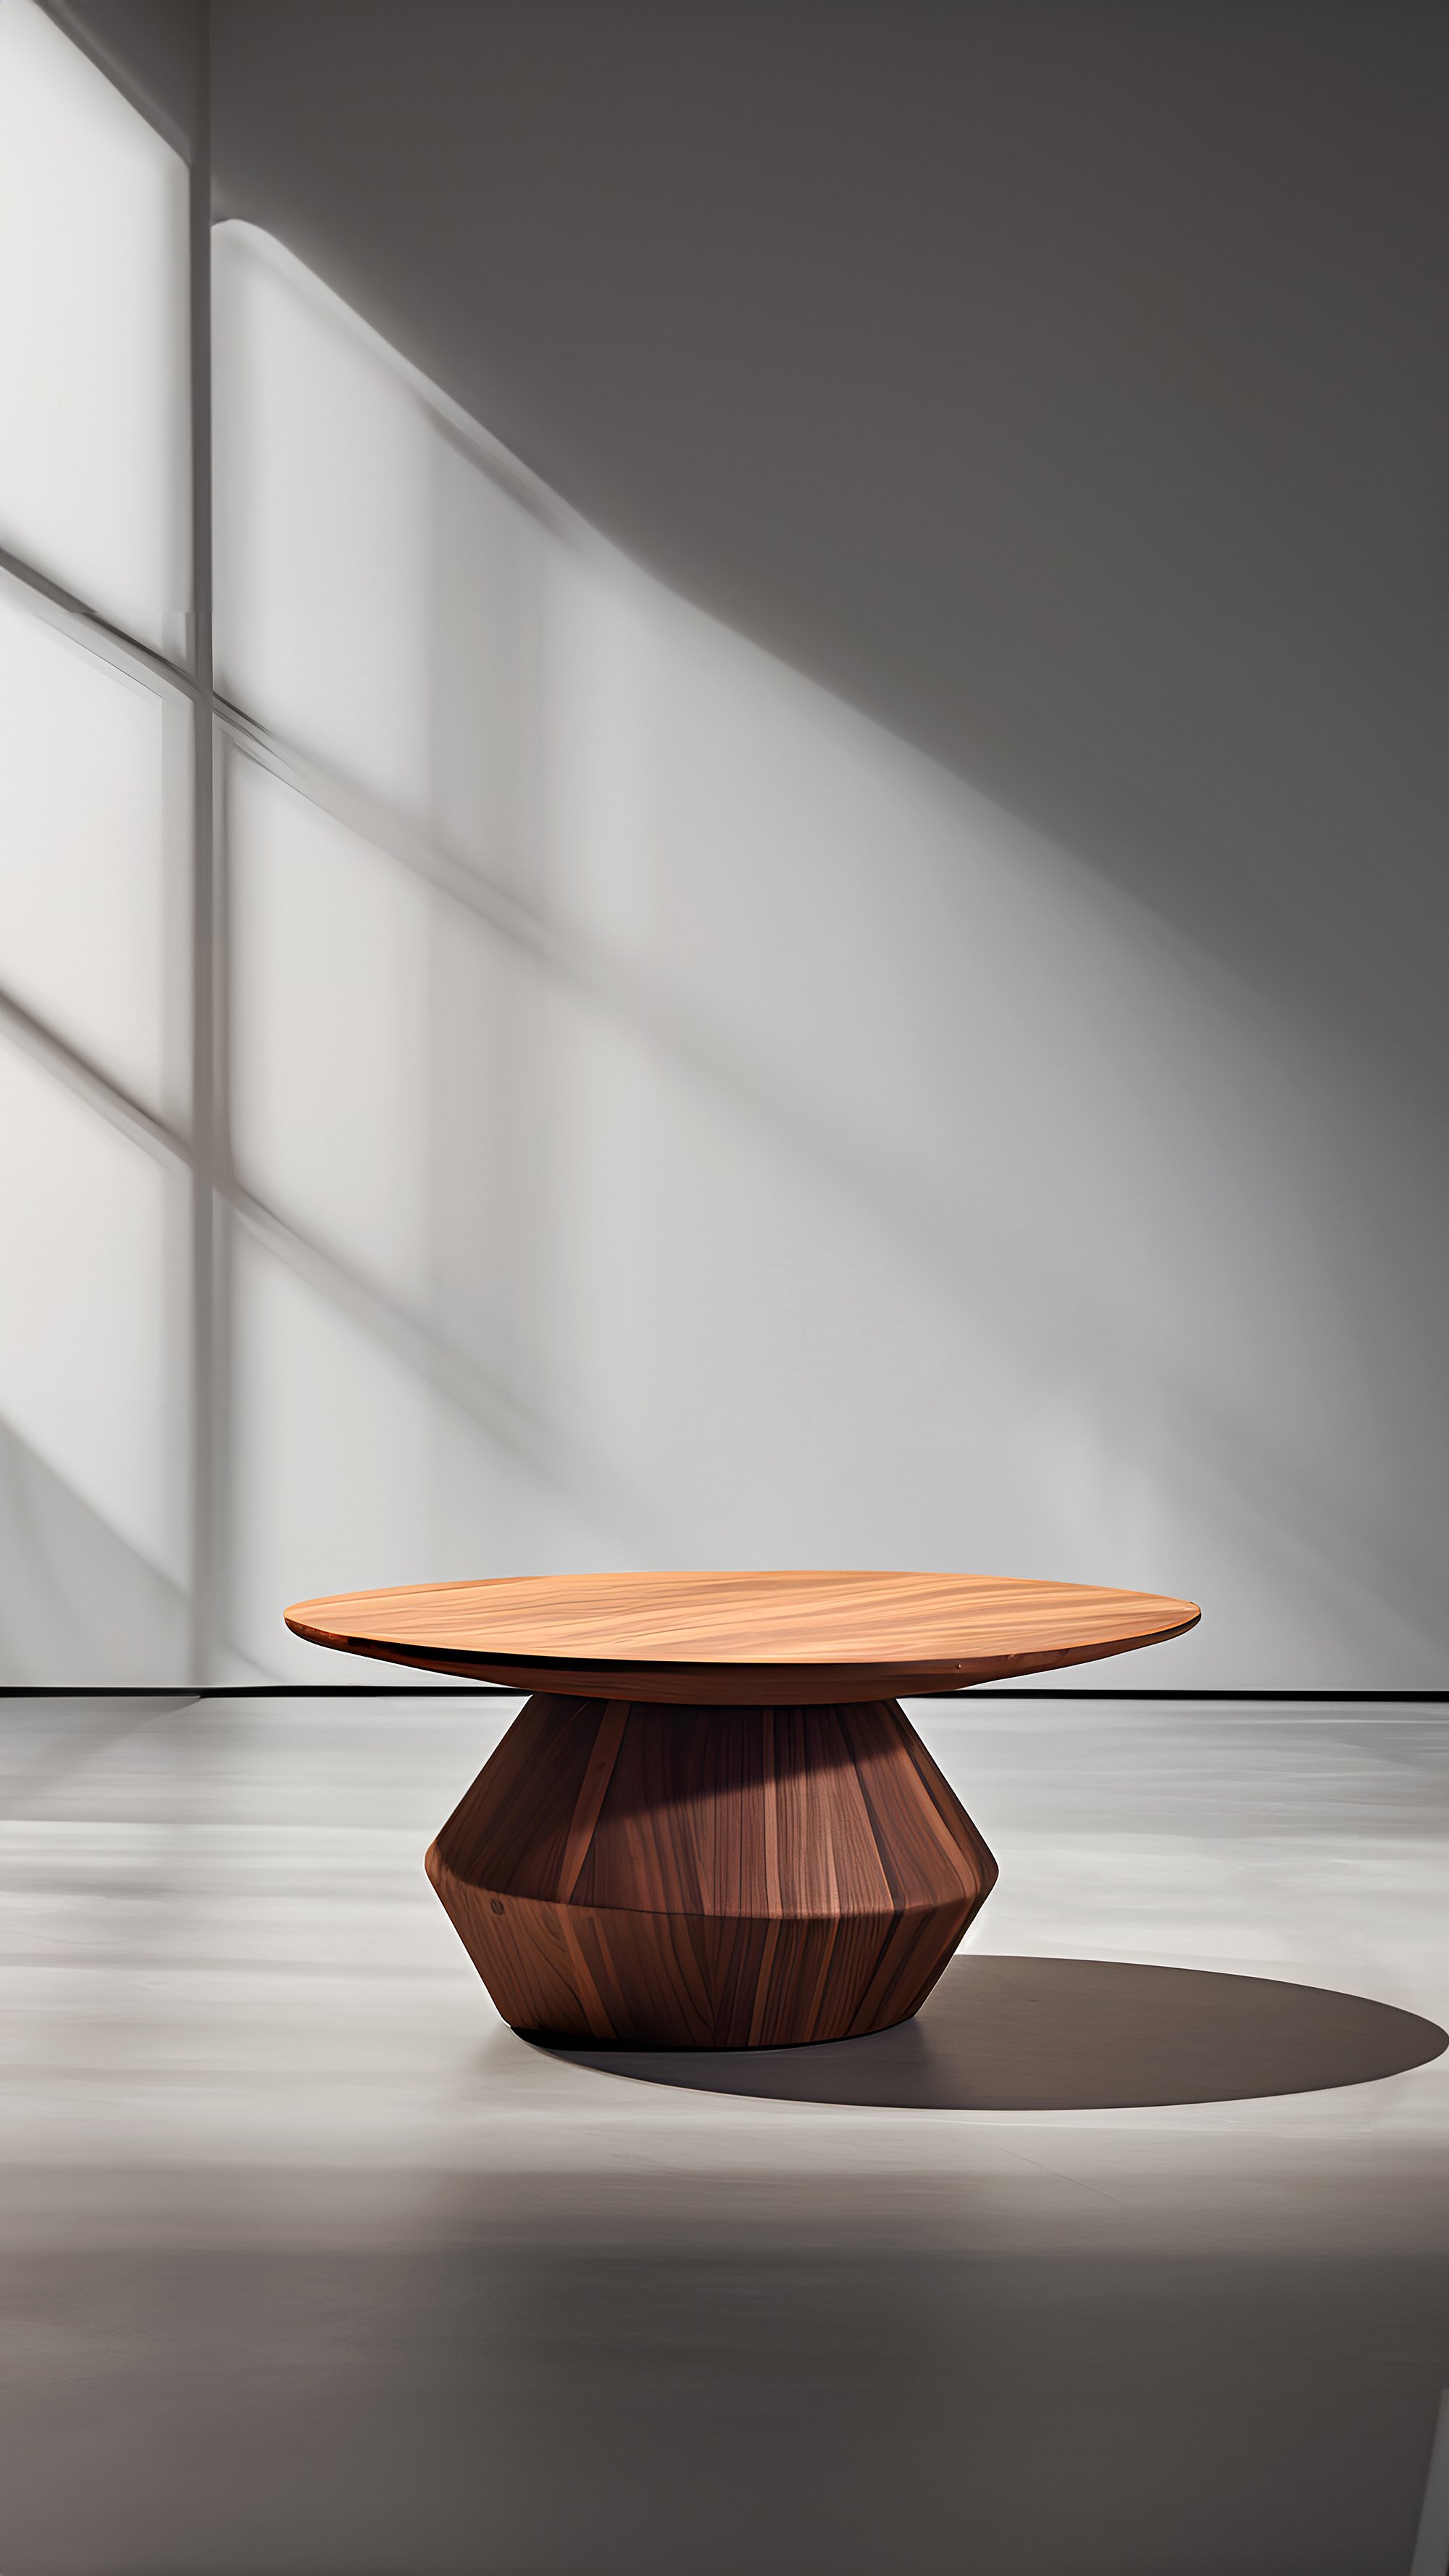 Sculptural Coffee Table Made of Solid Wood, Center Table Solace S41 by Joel Escalona — 6.jpg